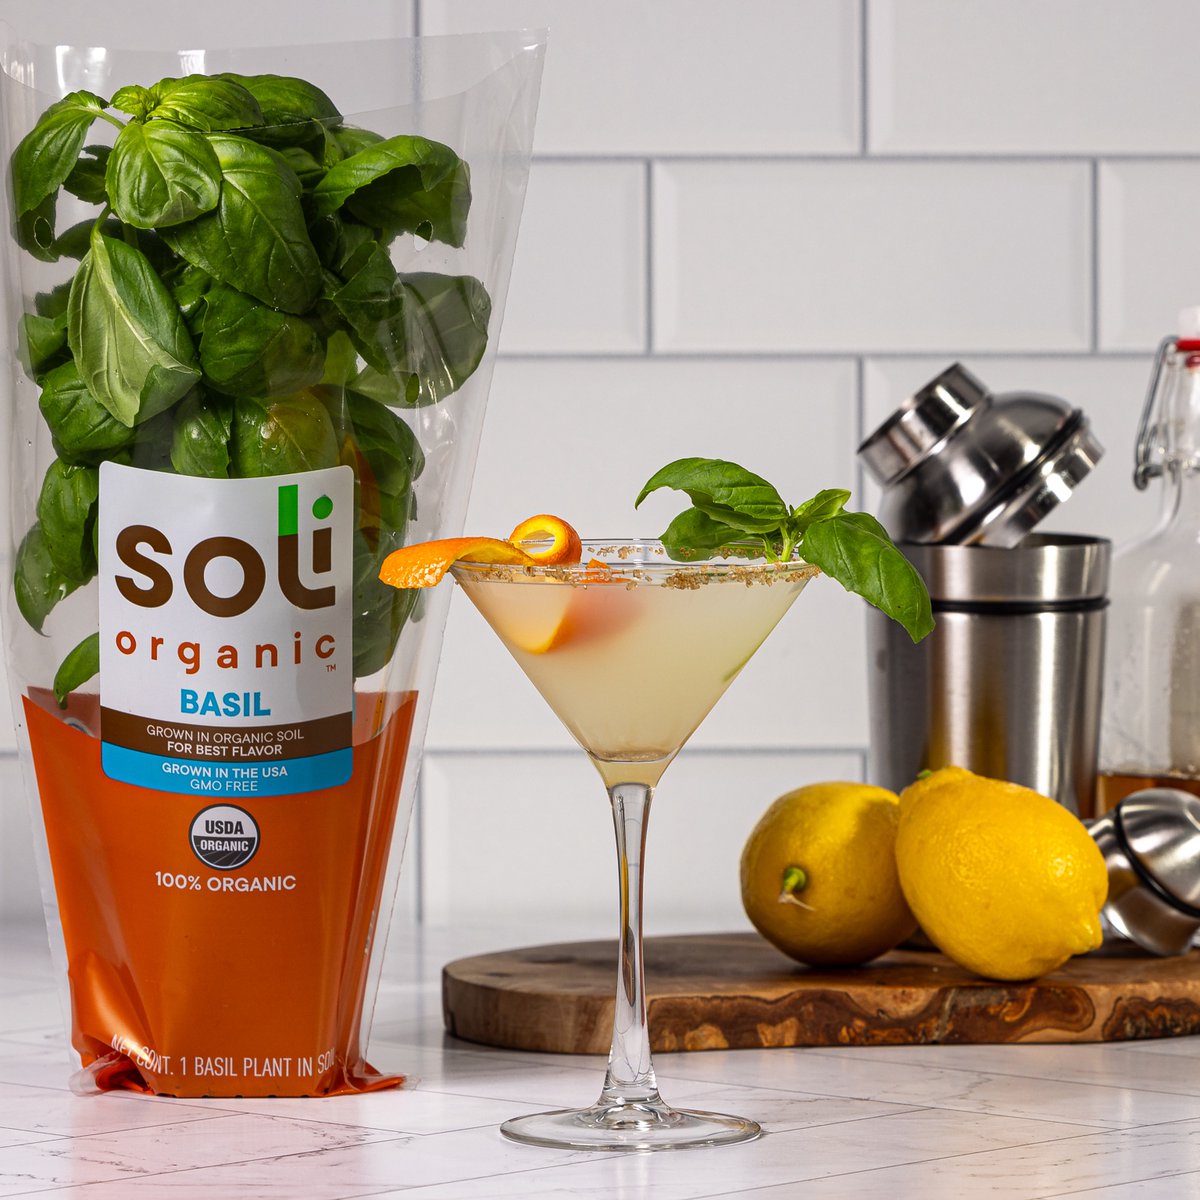 Don’t let the #CincoDeMayo vibes end just because it’s May 6th! Sip on a margarita with #Soliorganic 100% #Organic basil garnish🍹Grown regionally these basil leaves are free from synthetic pesticides or fertilizers🌱 Join us at #BBQinDC in June to see what the hype is all about